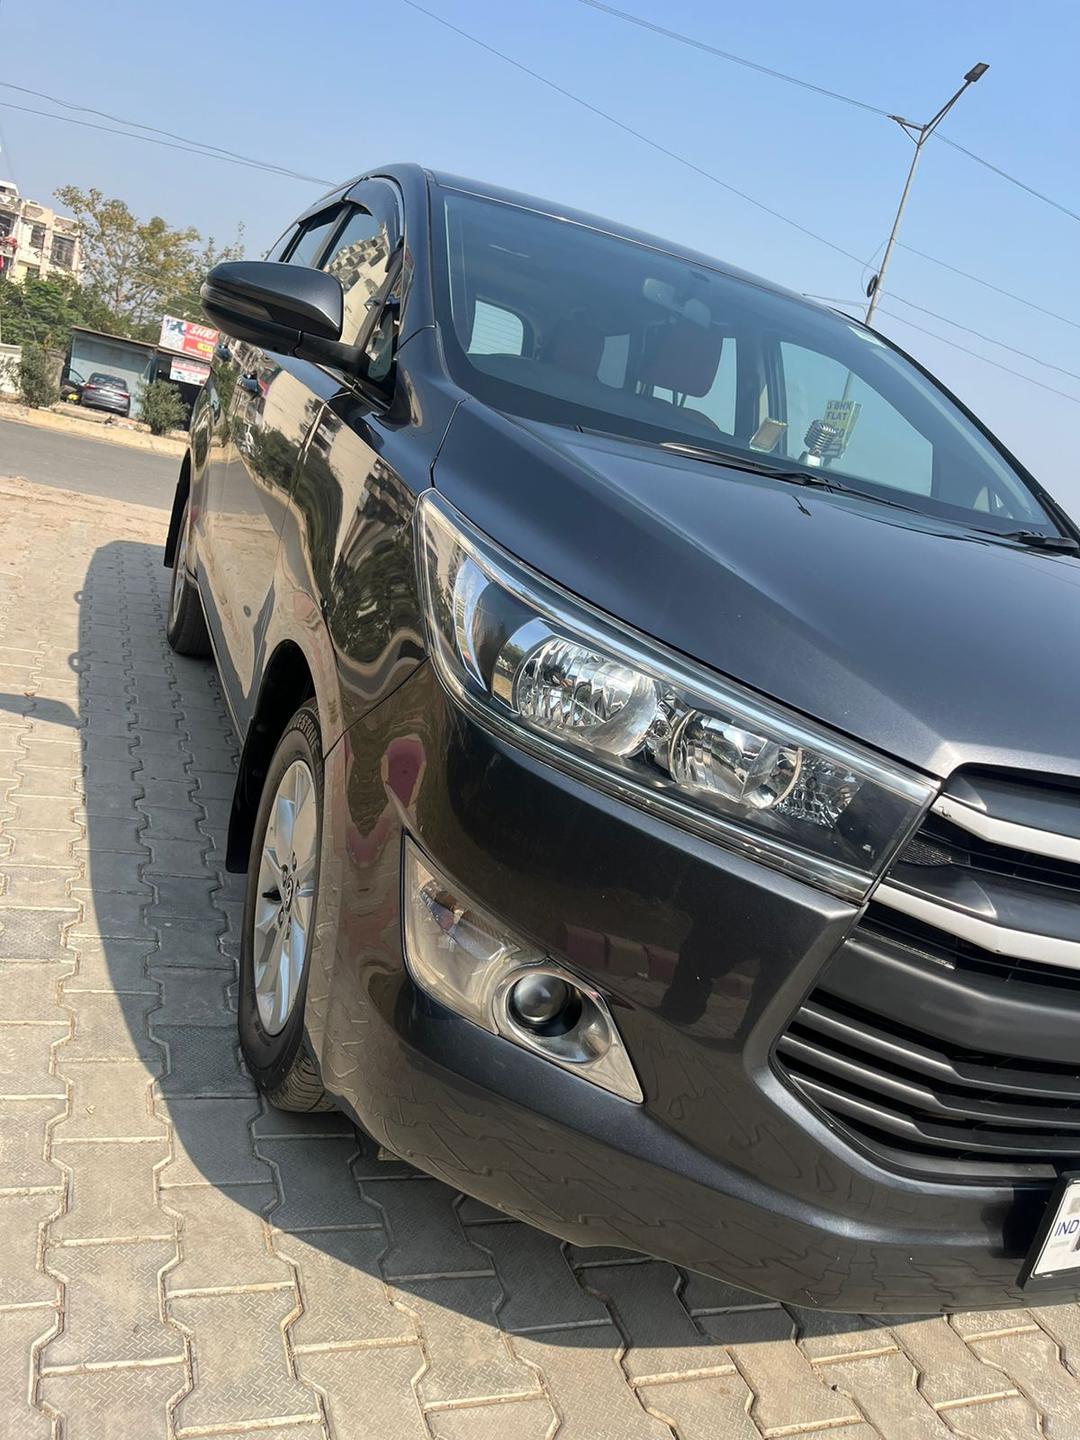 2019 Toyota Innova Crysta 2.4 GX MT 7-Seater BS IV Front Right View 